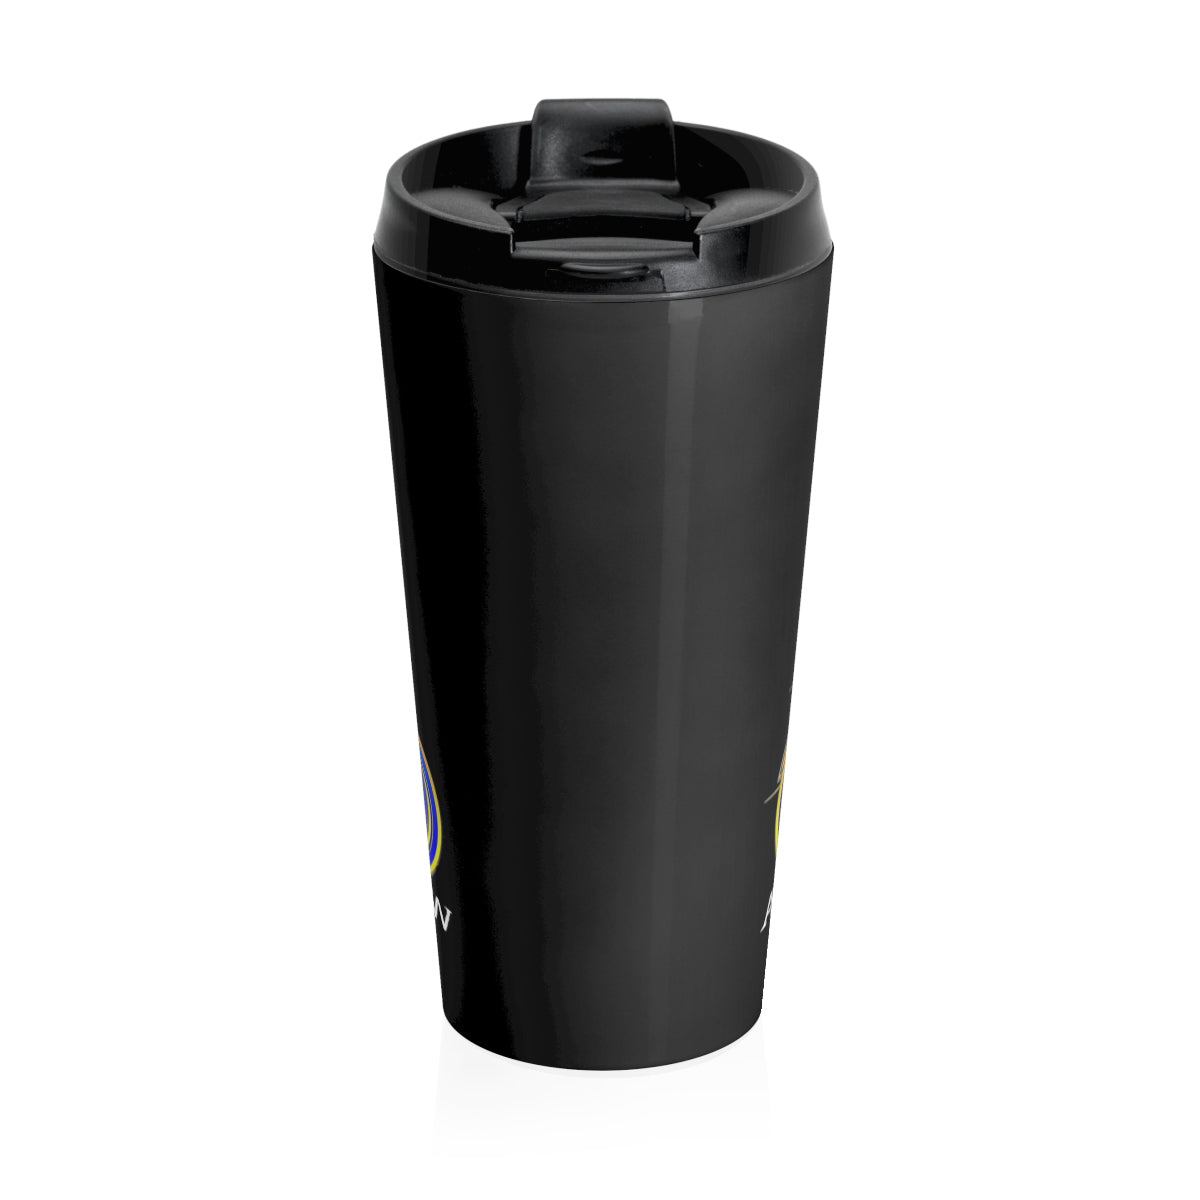 American Outlaw/Stainless Steel Travel Mug